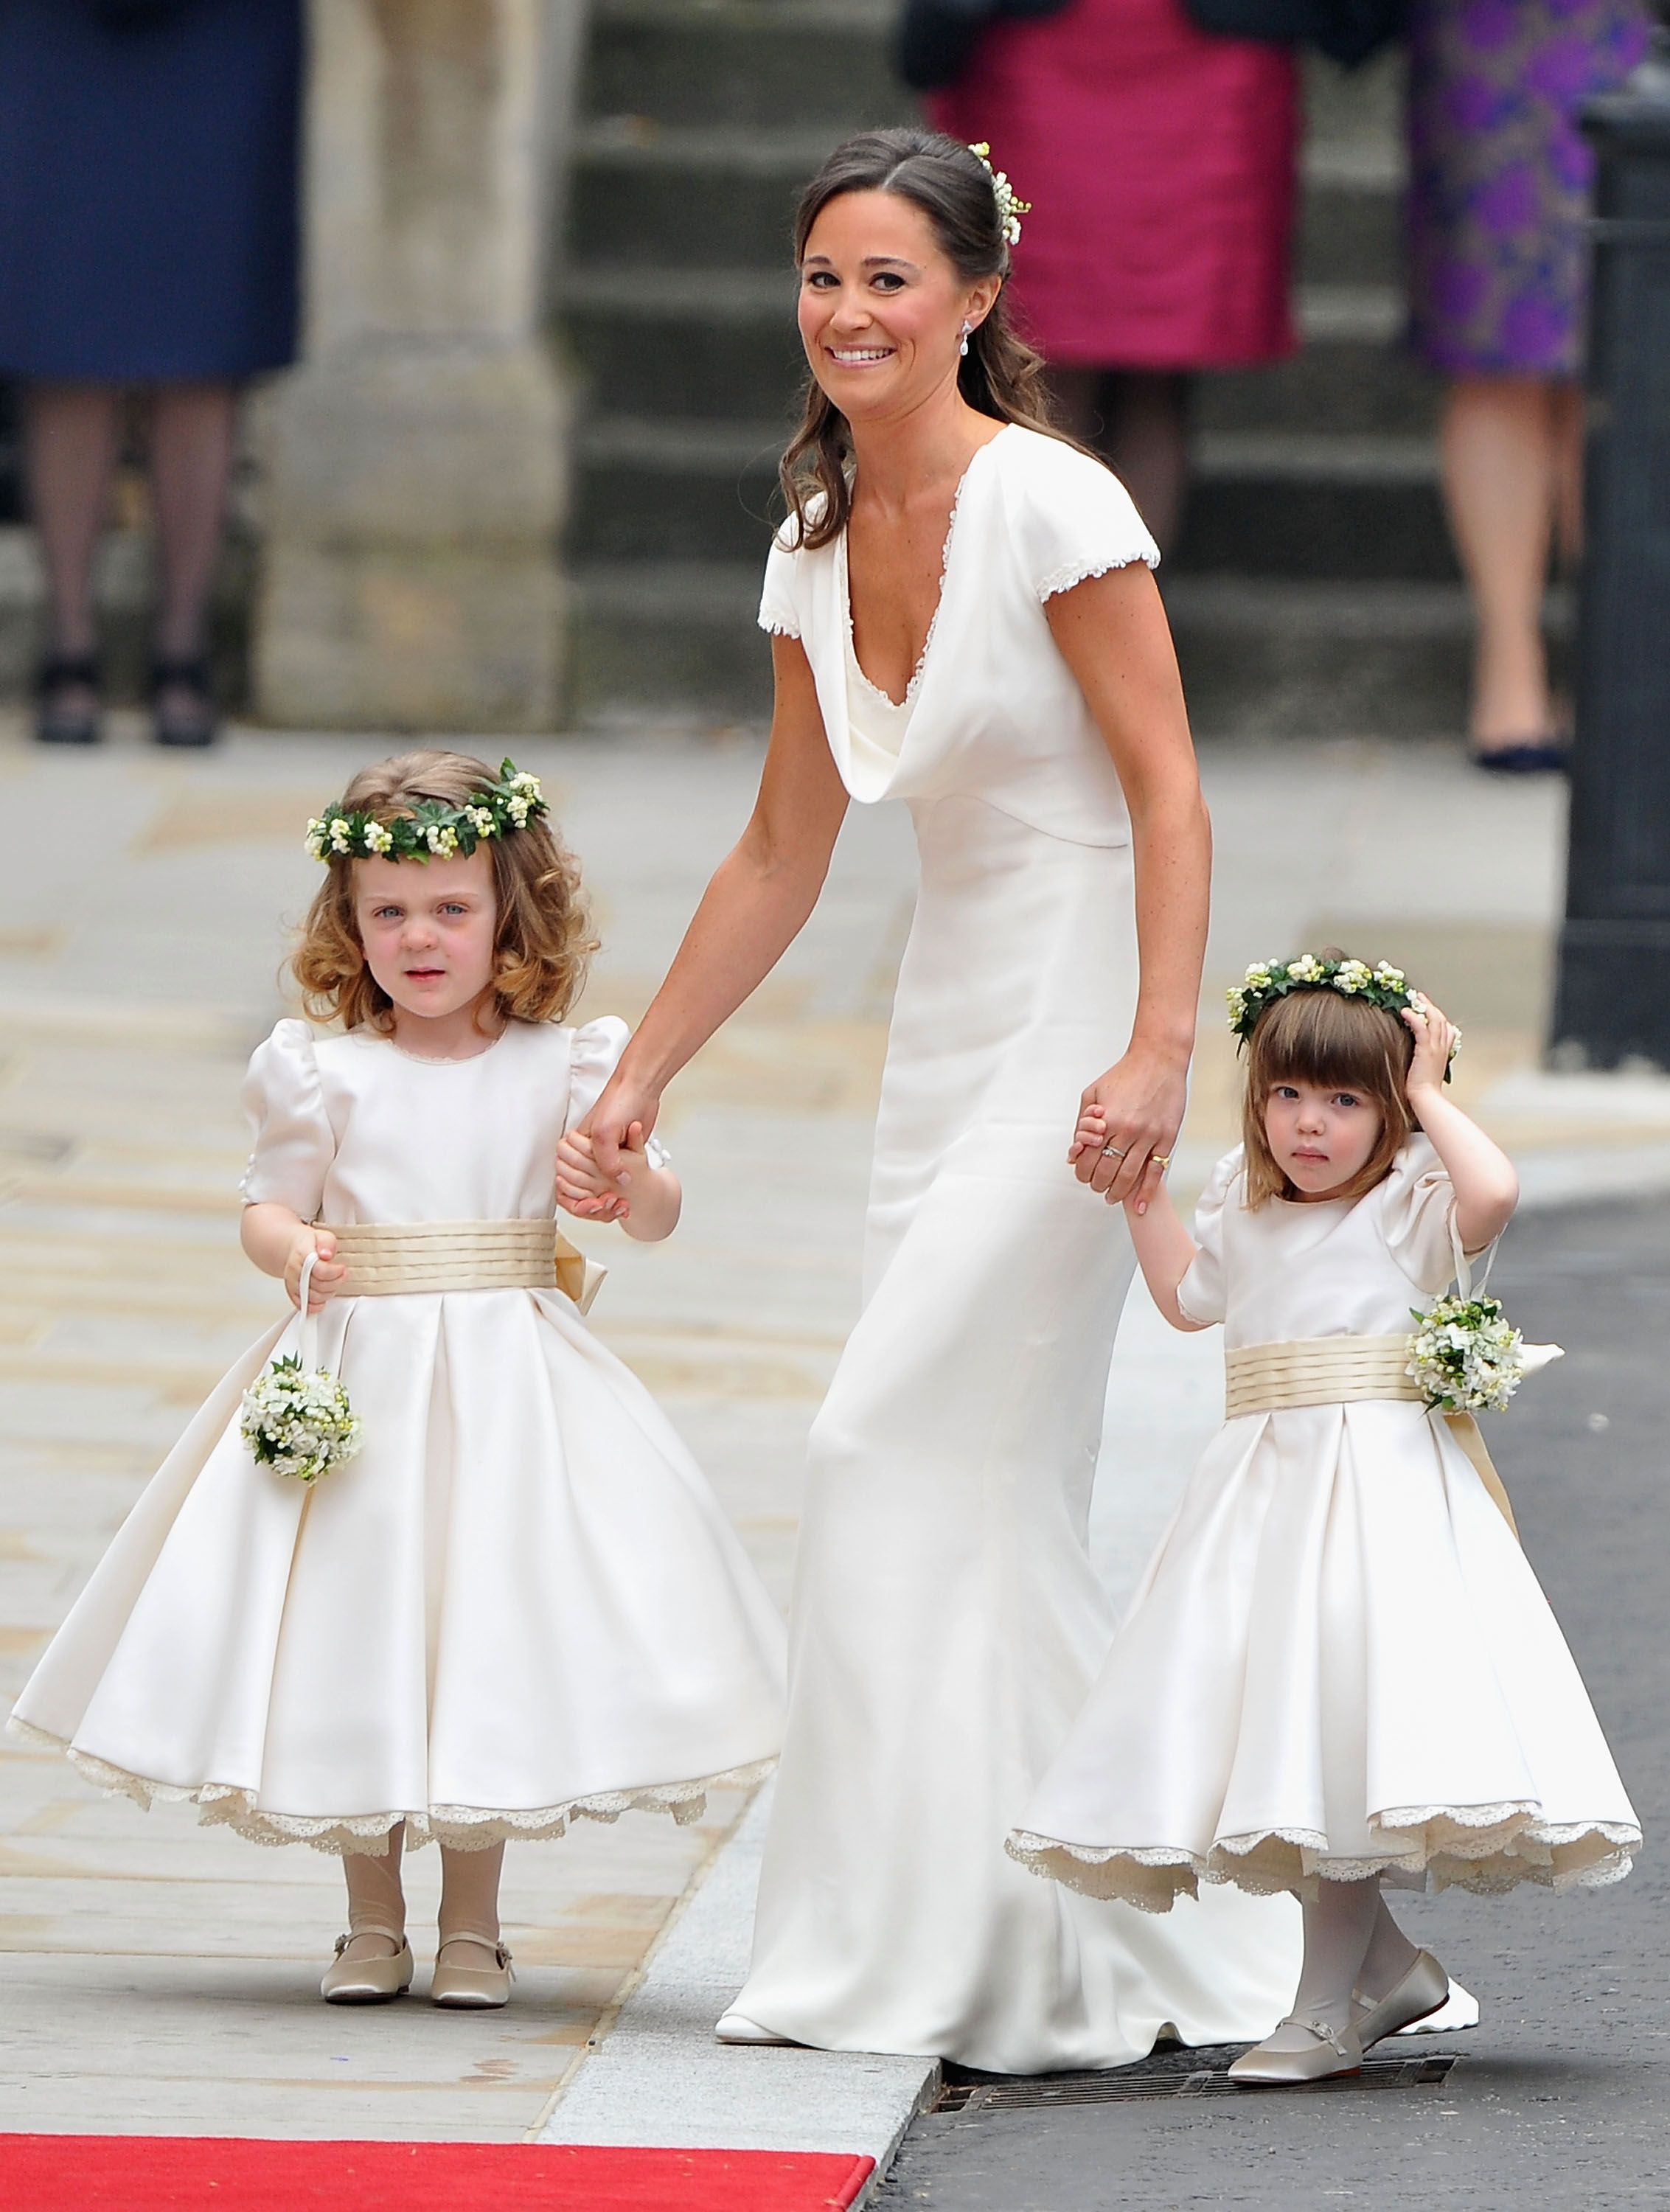 Sister of the bride and Maid of Honour Pippa Middleton holds hands with Grace Van Cutsem and Eliza Lopes as they arrive to attend the Royal Wedding of Prince William to Catherine Middleton at Westminster Abbey on April 29, 2011 | Photo: Getty Images